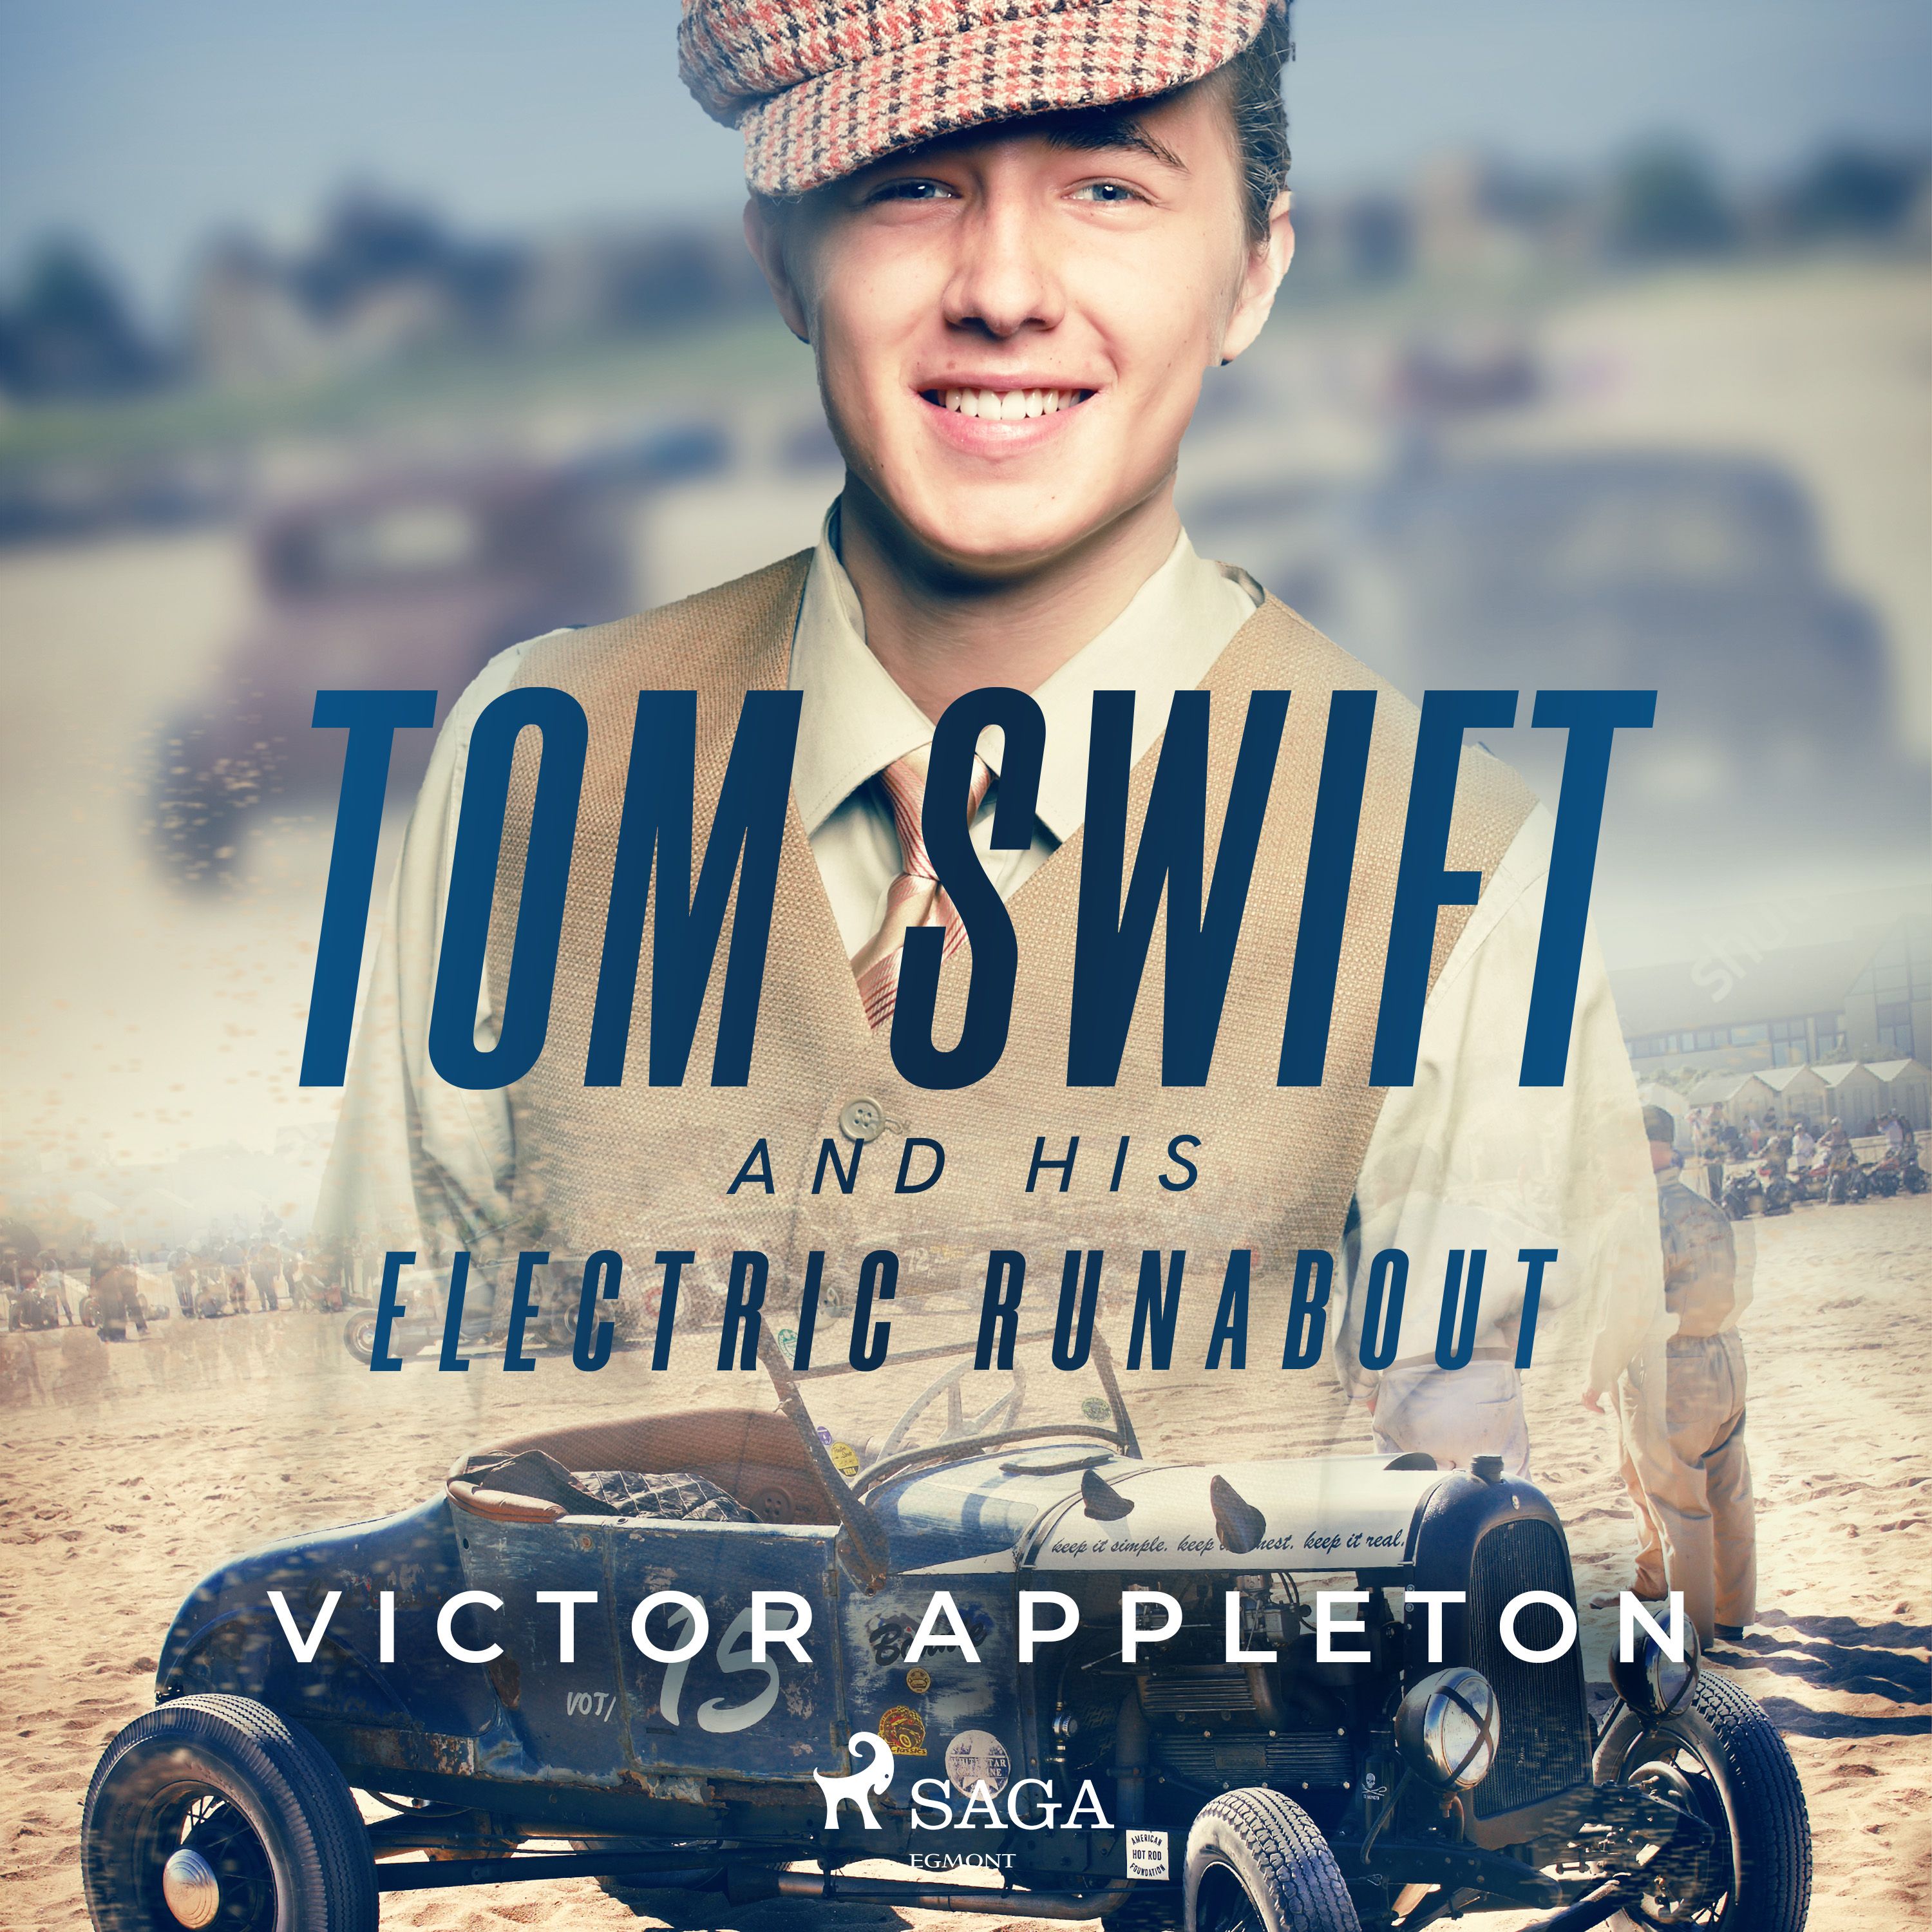 Tom Swift and His Electric Runabout, audiobook by Victor Appleton